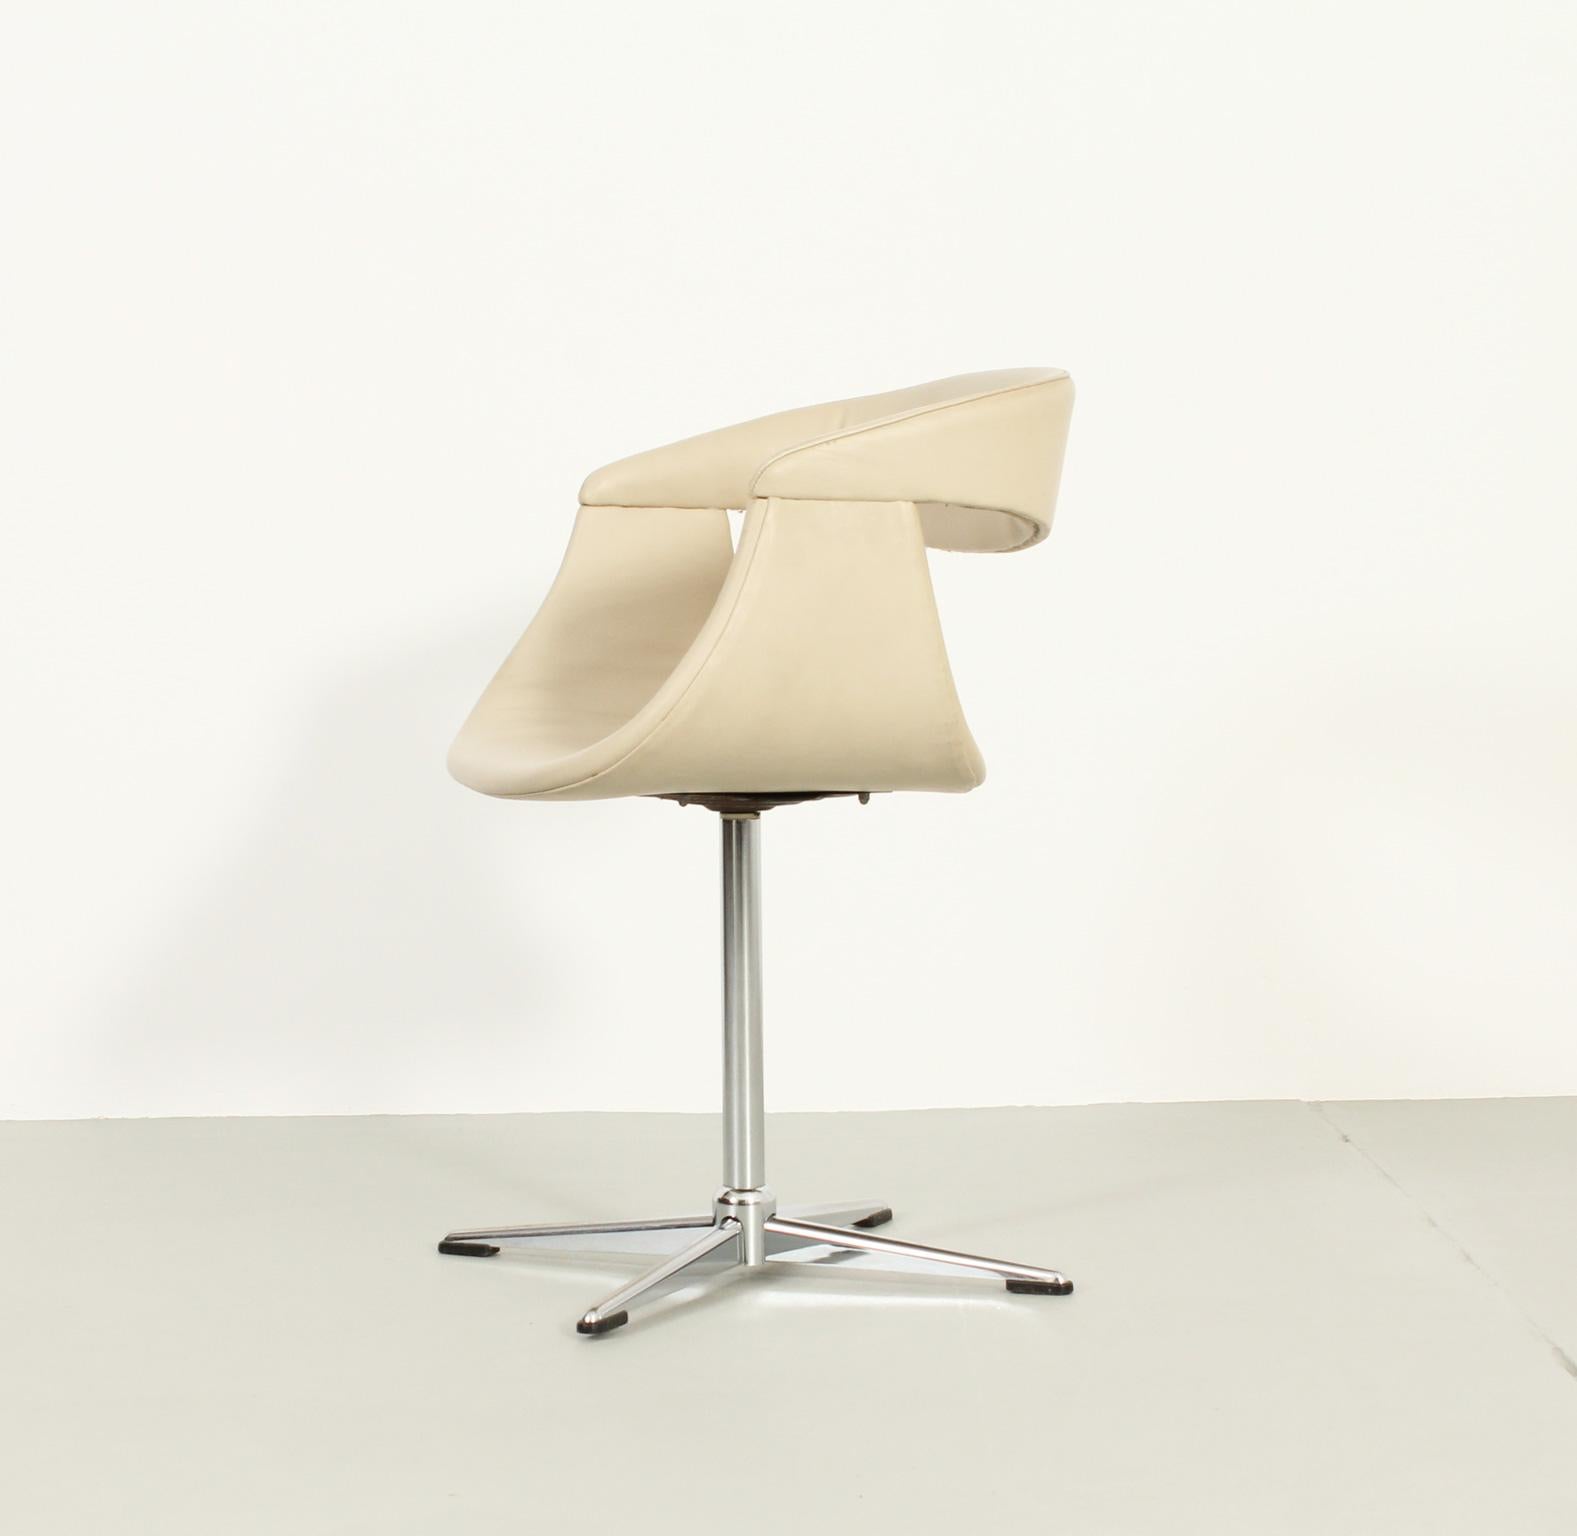 French Office Swivel Chair in Cream Leather, France, 1960's For Sale